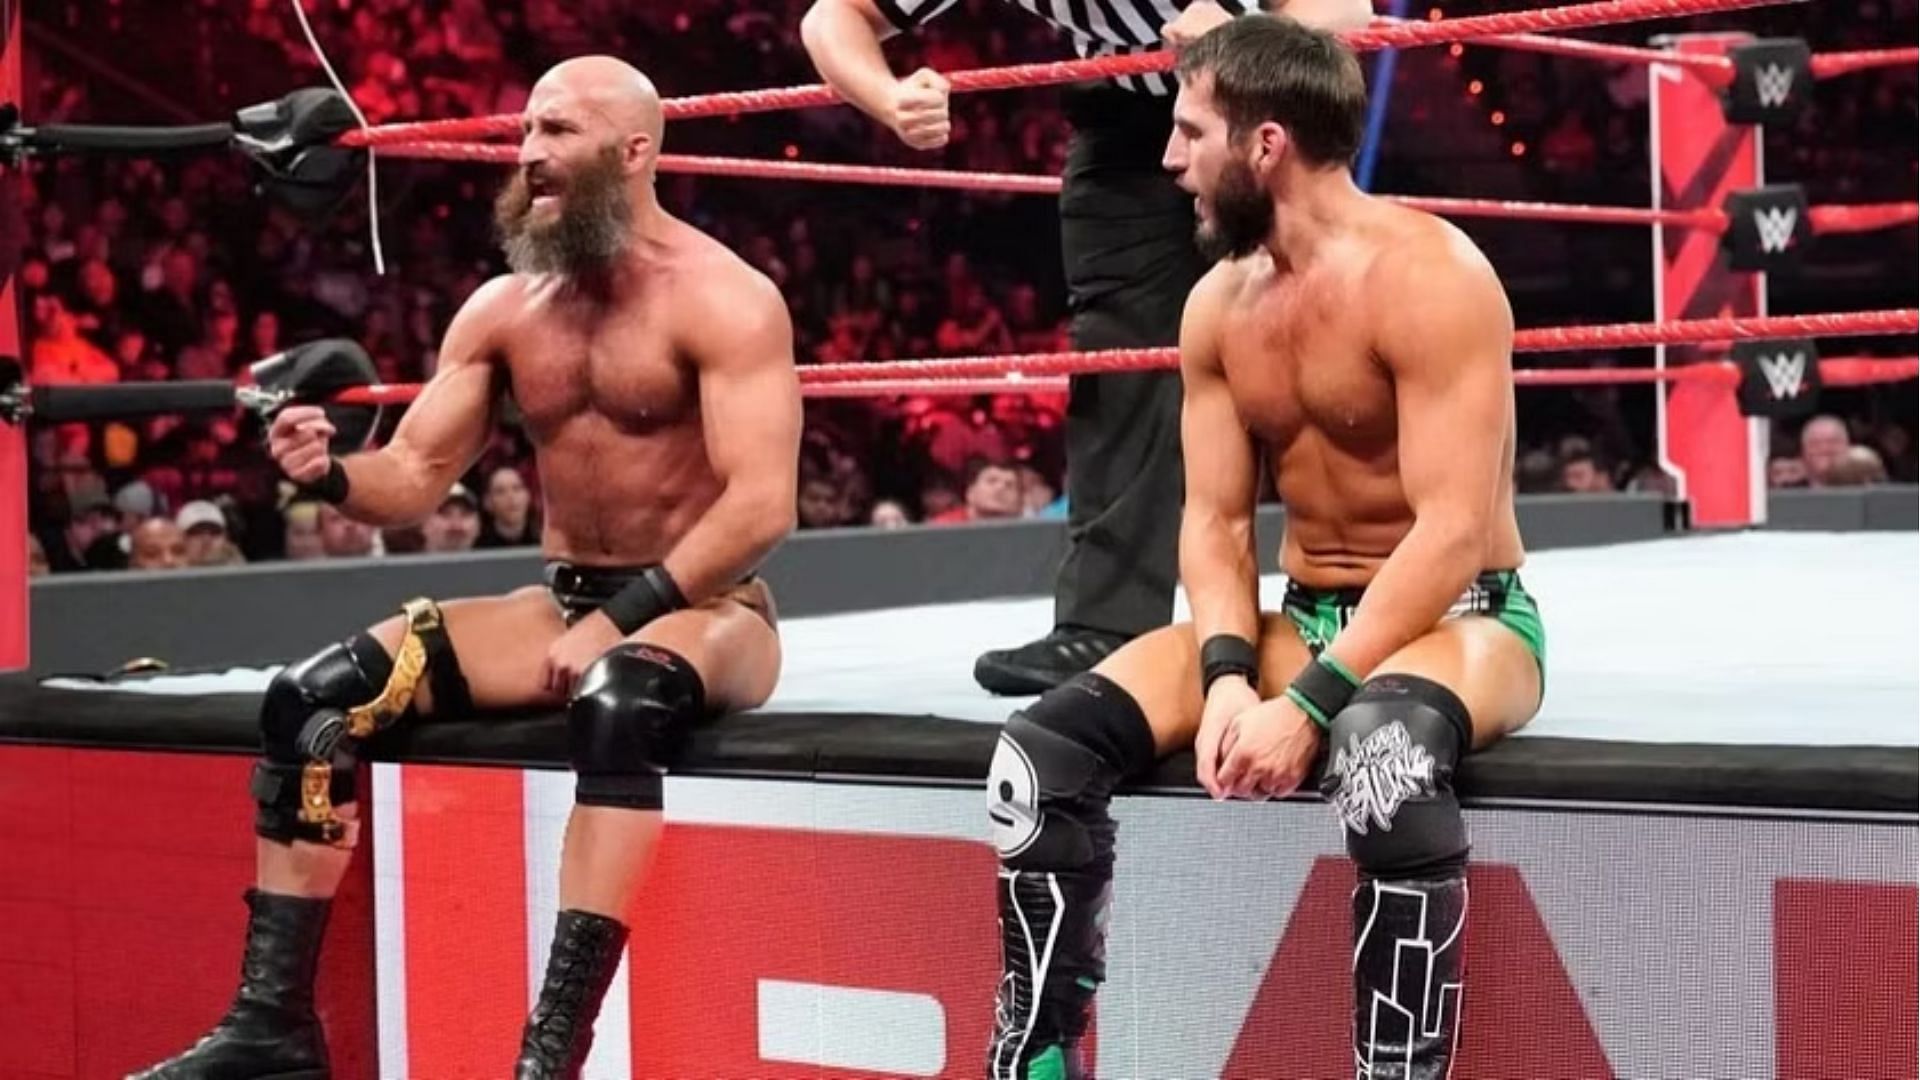 Ciampa and Gargano were an extremely popular team in NXT